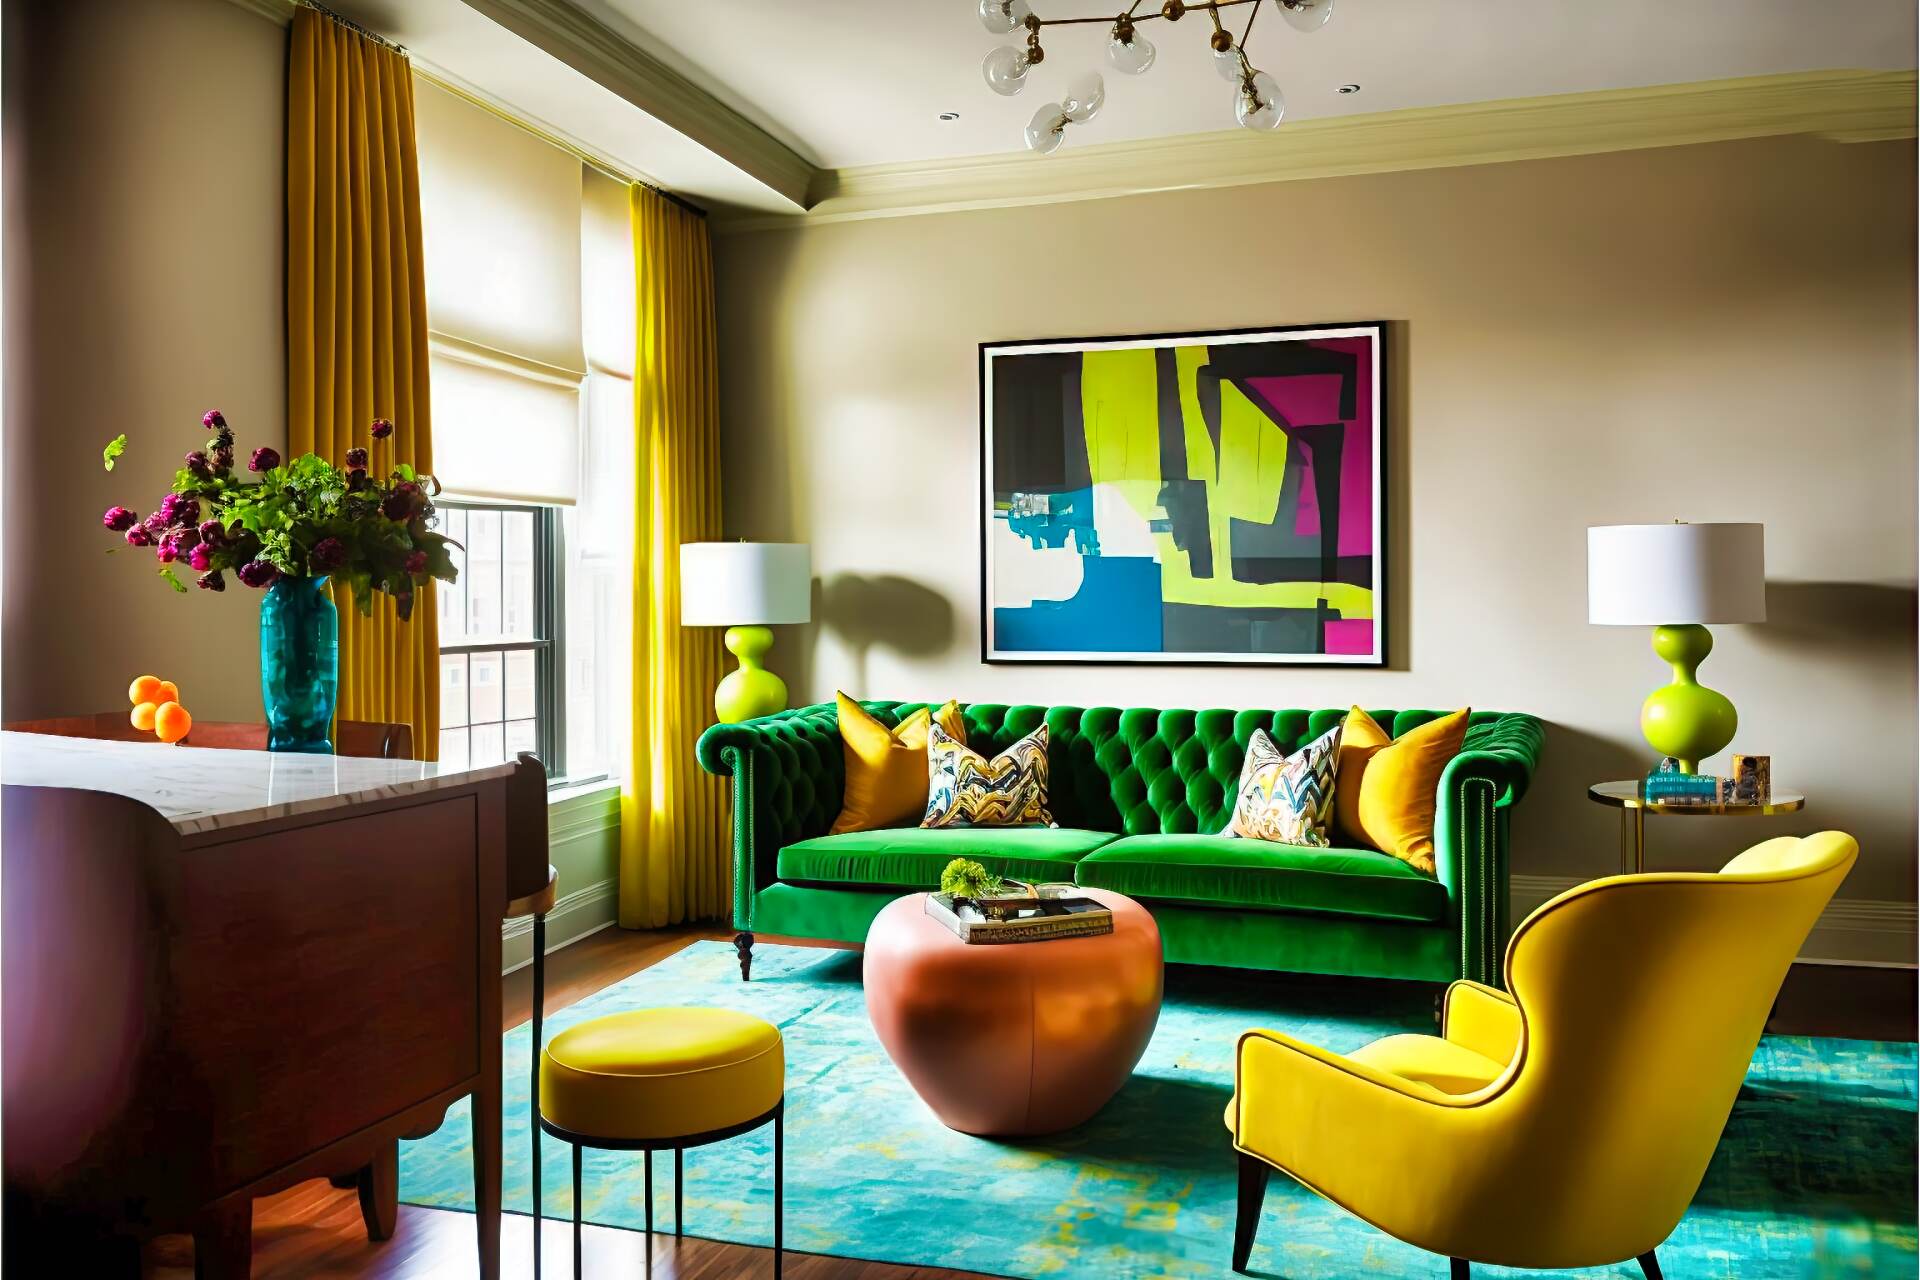 This Modern Eclectic Living Room Features An Eclectic Mix Of Furniture, From A Colorful Armchair To A Vintage Side Table. A Large Green Sofa Brings A Vibrant Touch To The Room, While A Wooden Coffee Table And A Bright Yellow Rug Add Contrast. A Large Abstract Painting Provides The Perfect Backdrop To The Room.